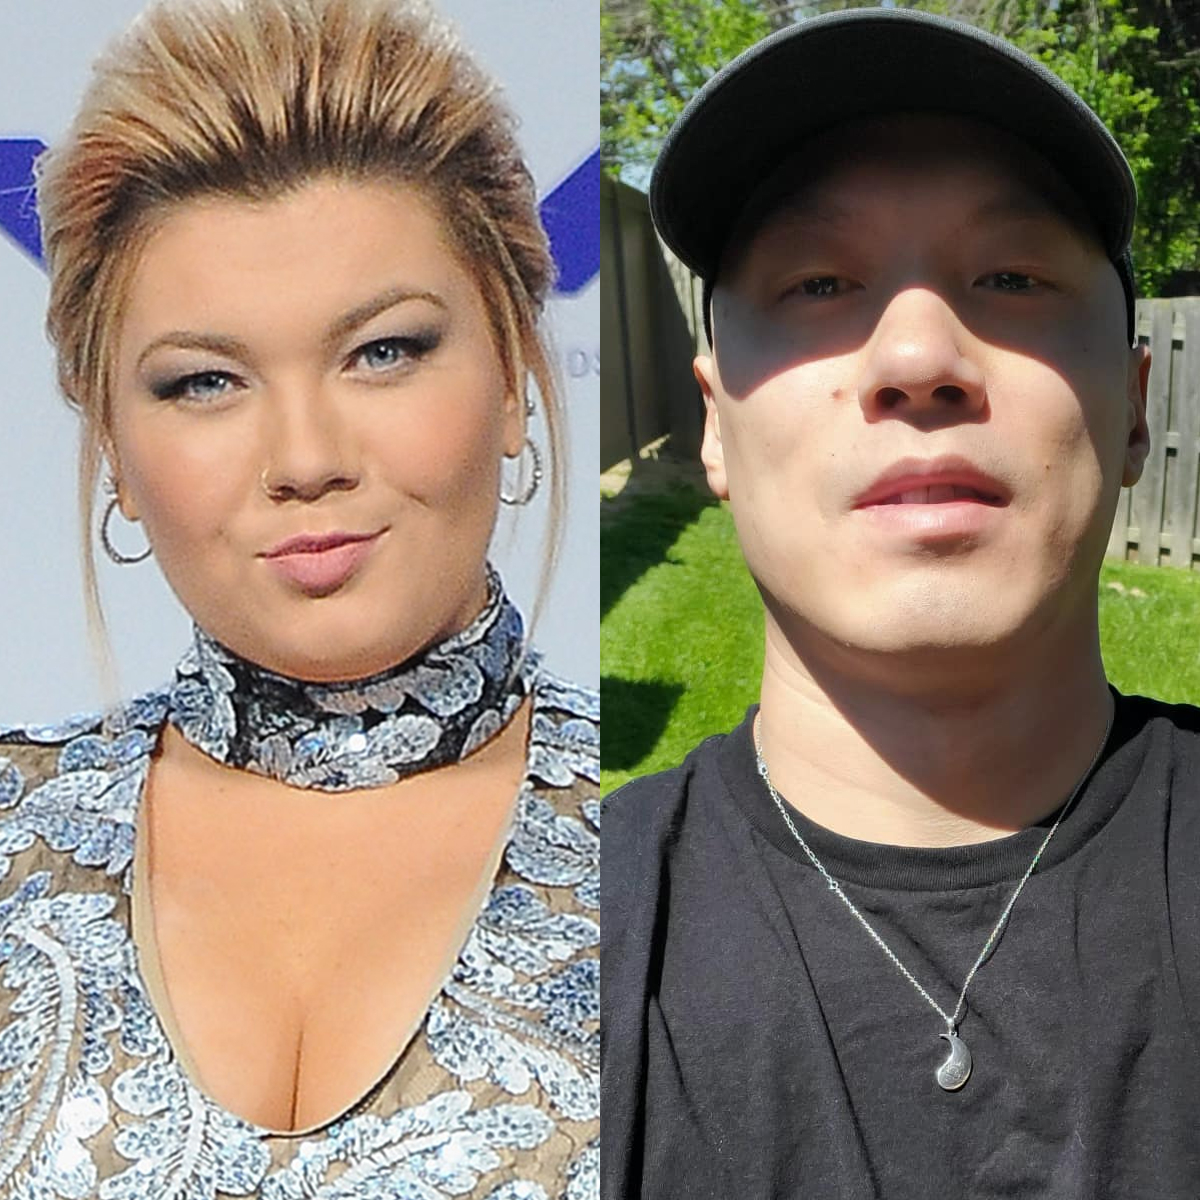 Amber Portwood’s Fiancé Gary Wayt Found After Disappearance